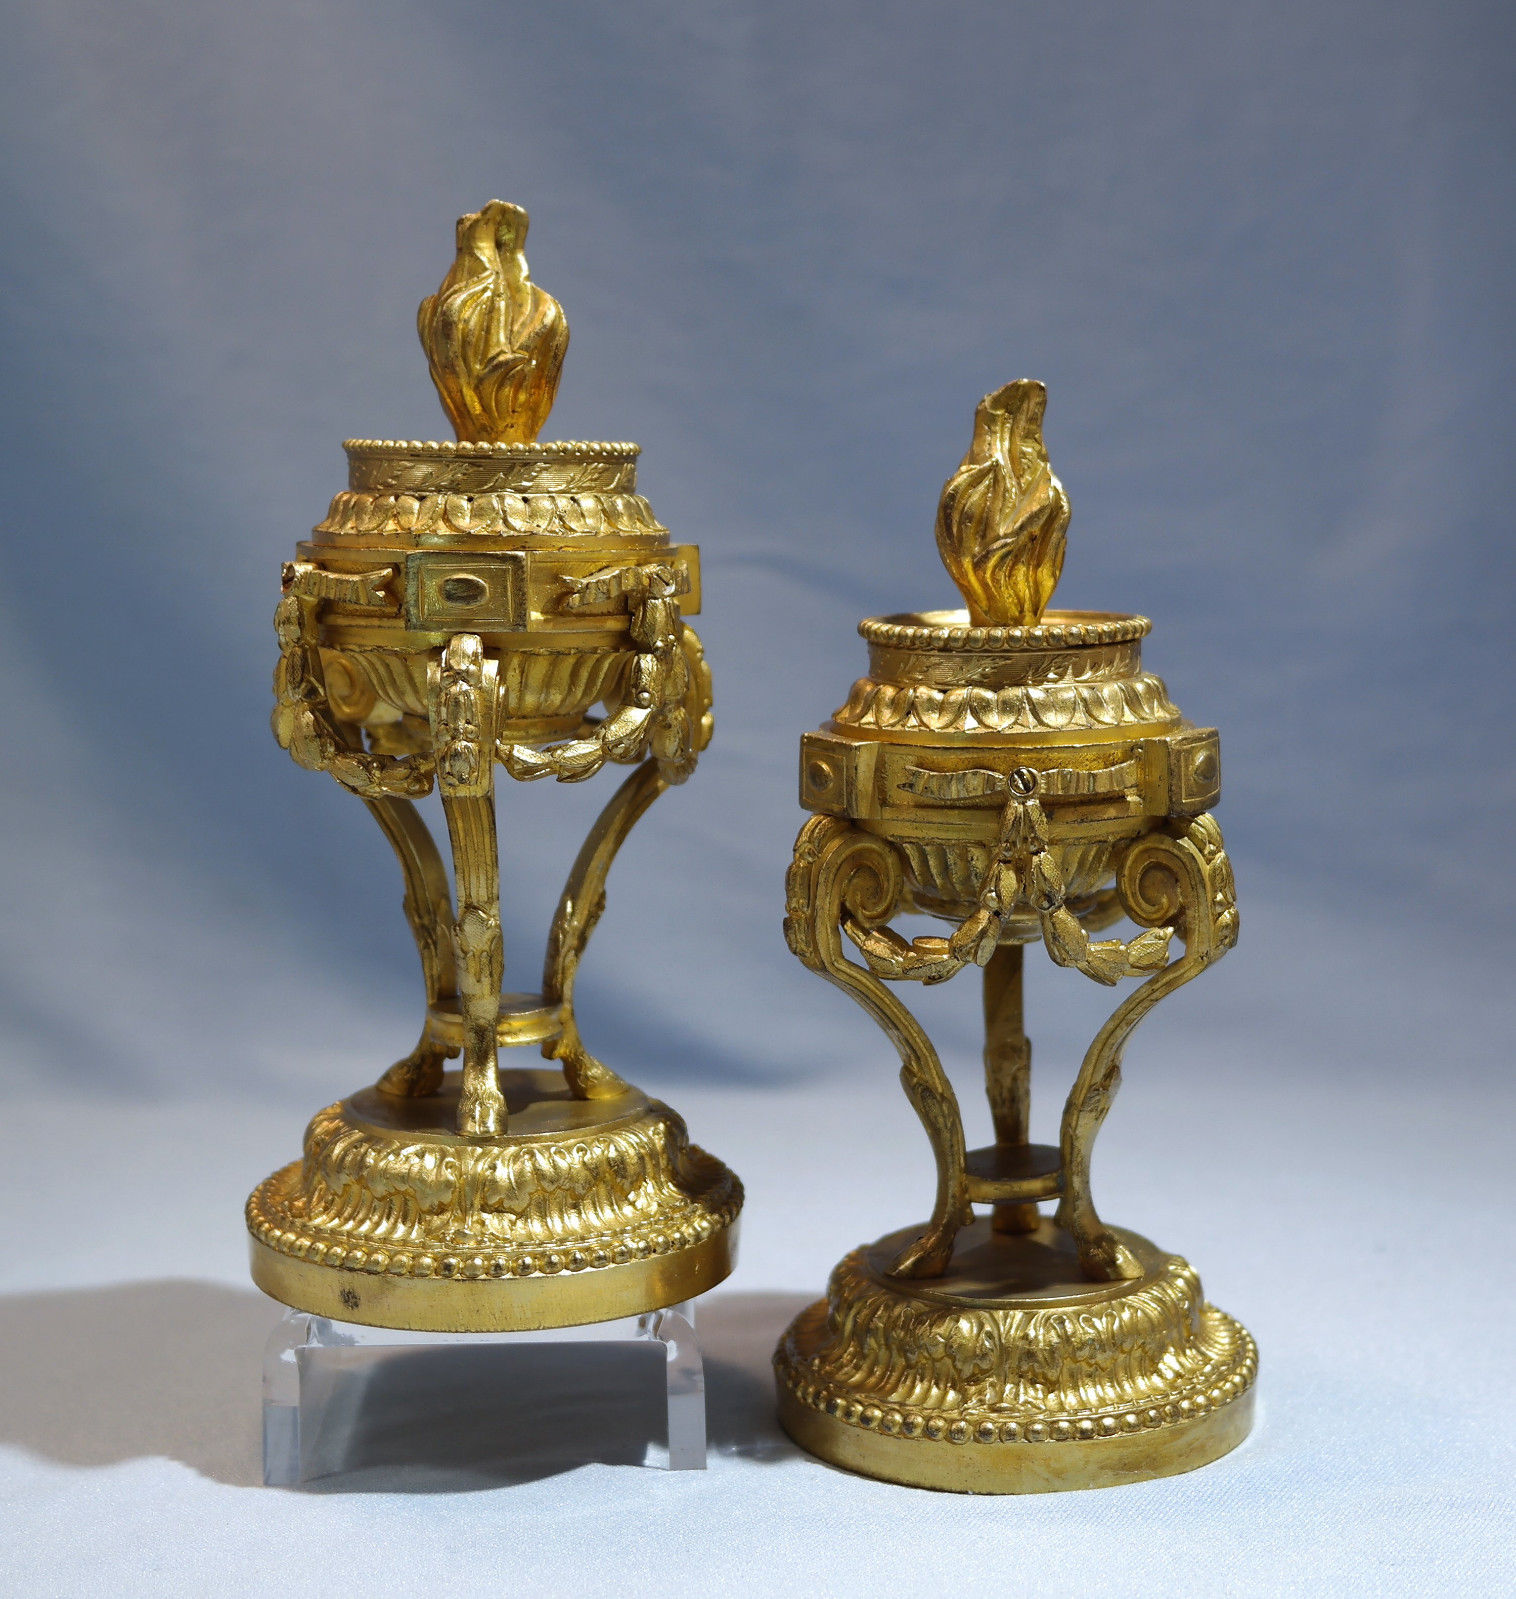 Henry Picard French Gilt Bronze Pair of Candlesticks Circa 1880s